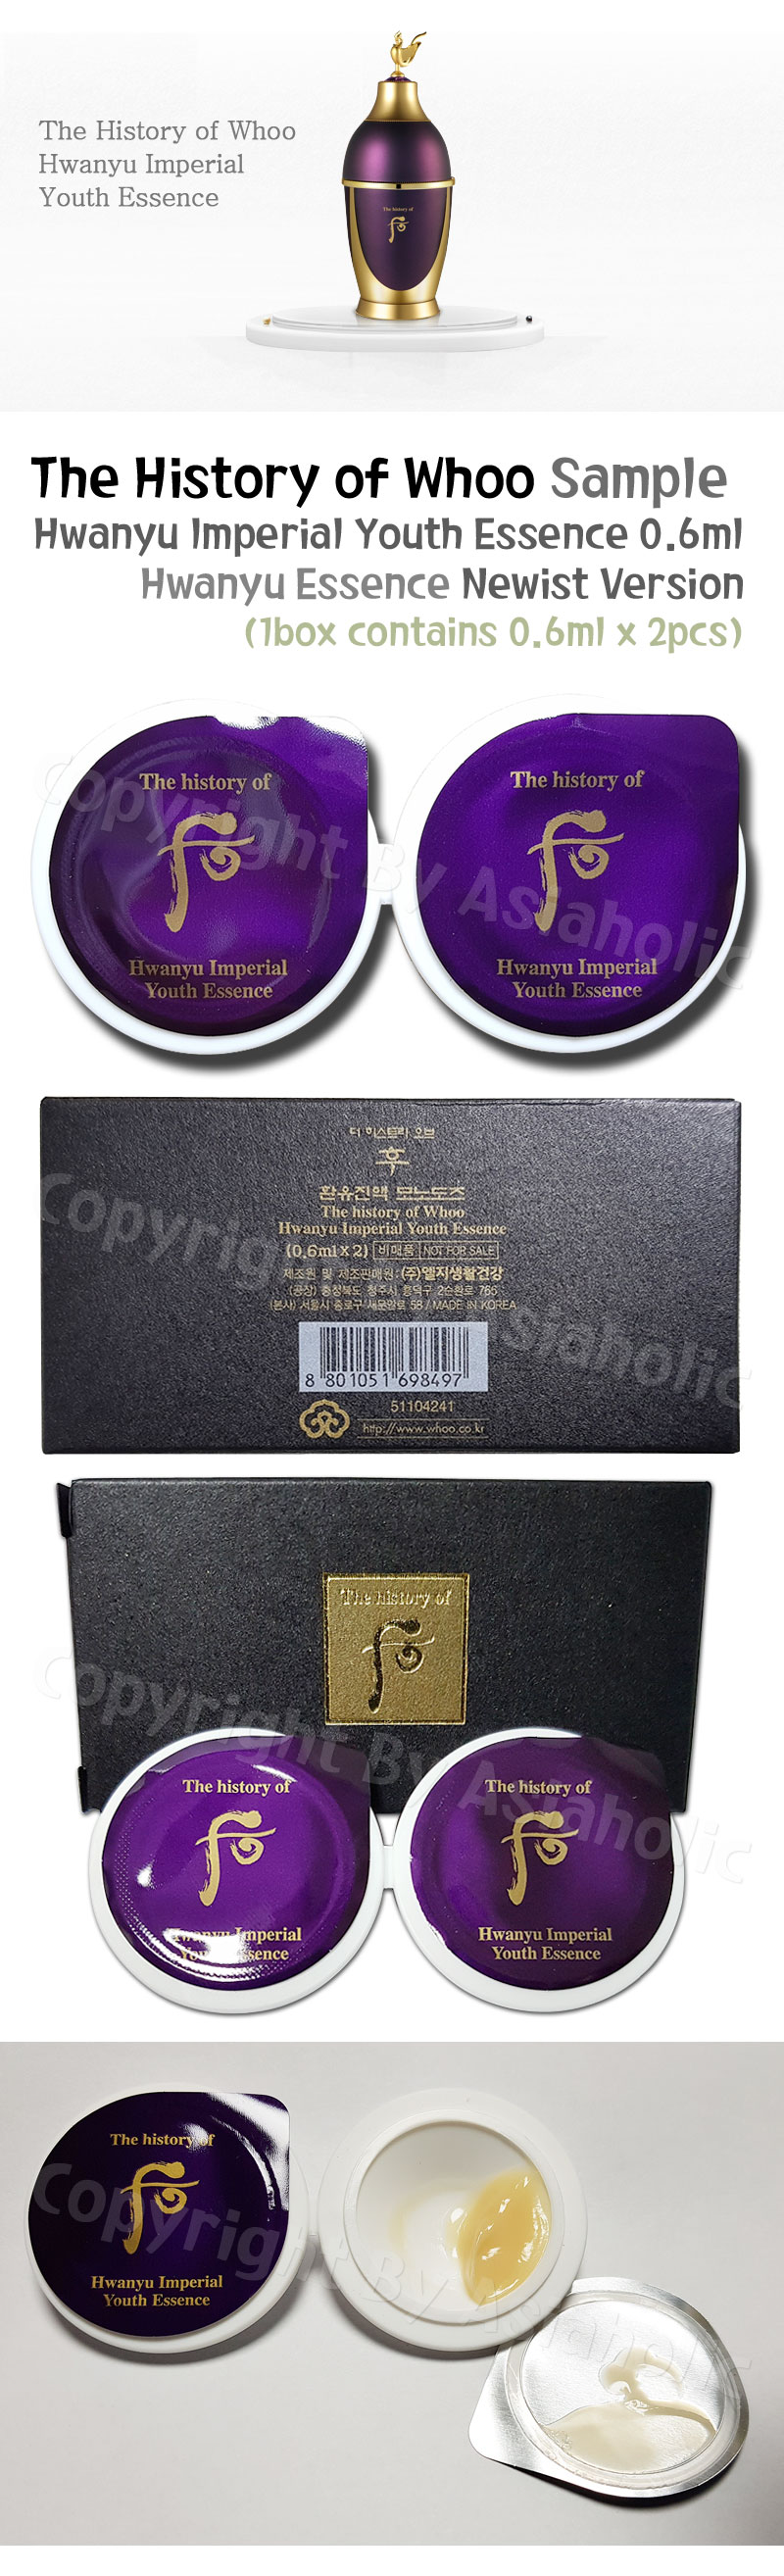 The history of Whoo Hwanyu Imperial Youth Essence 0.6ml x 50pcs (25Box) Newest Version